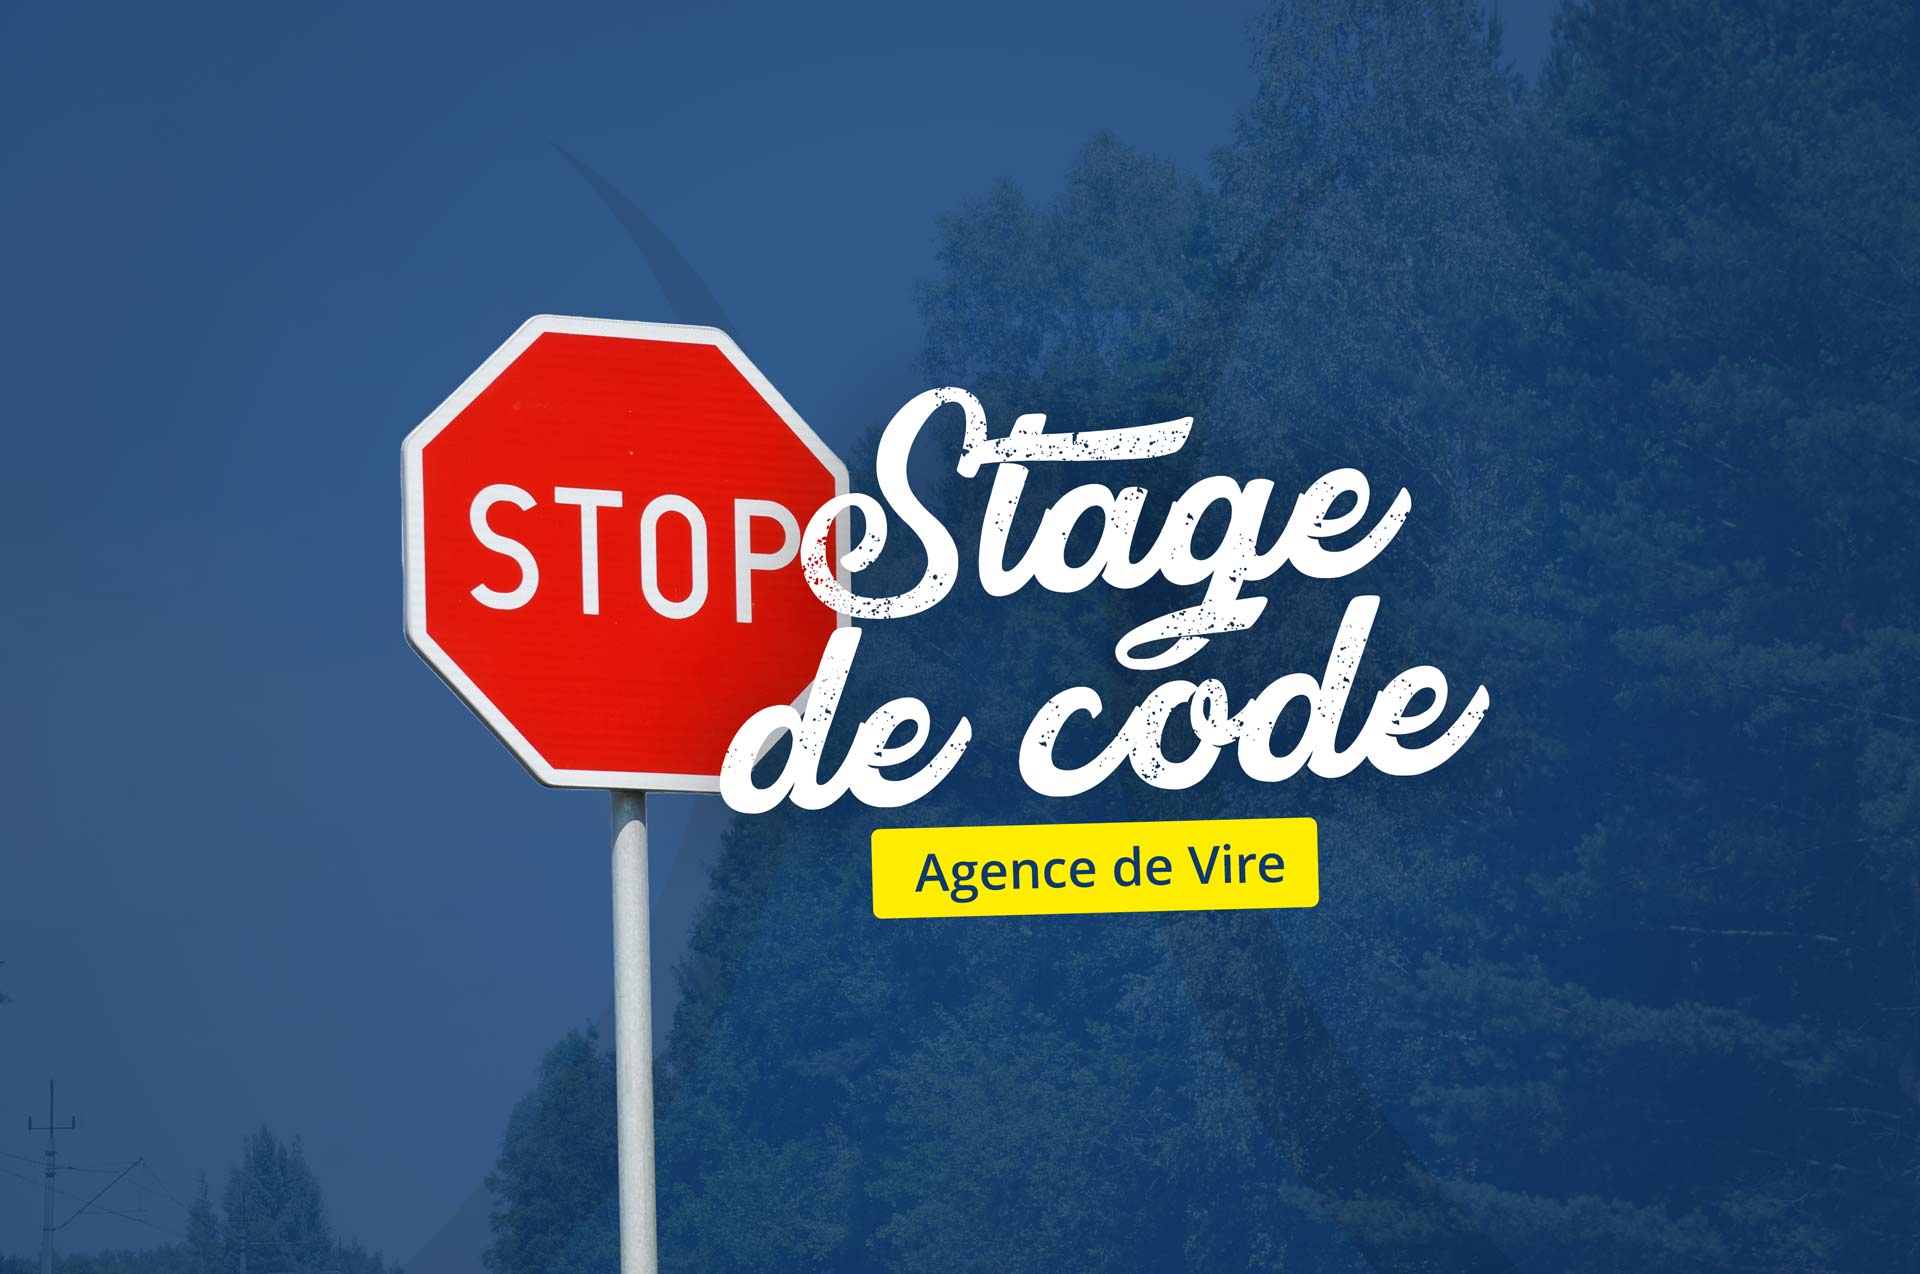 stage code vire viking auto ecole calvados